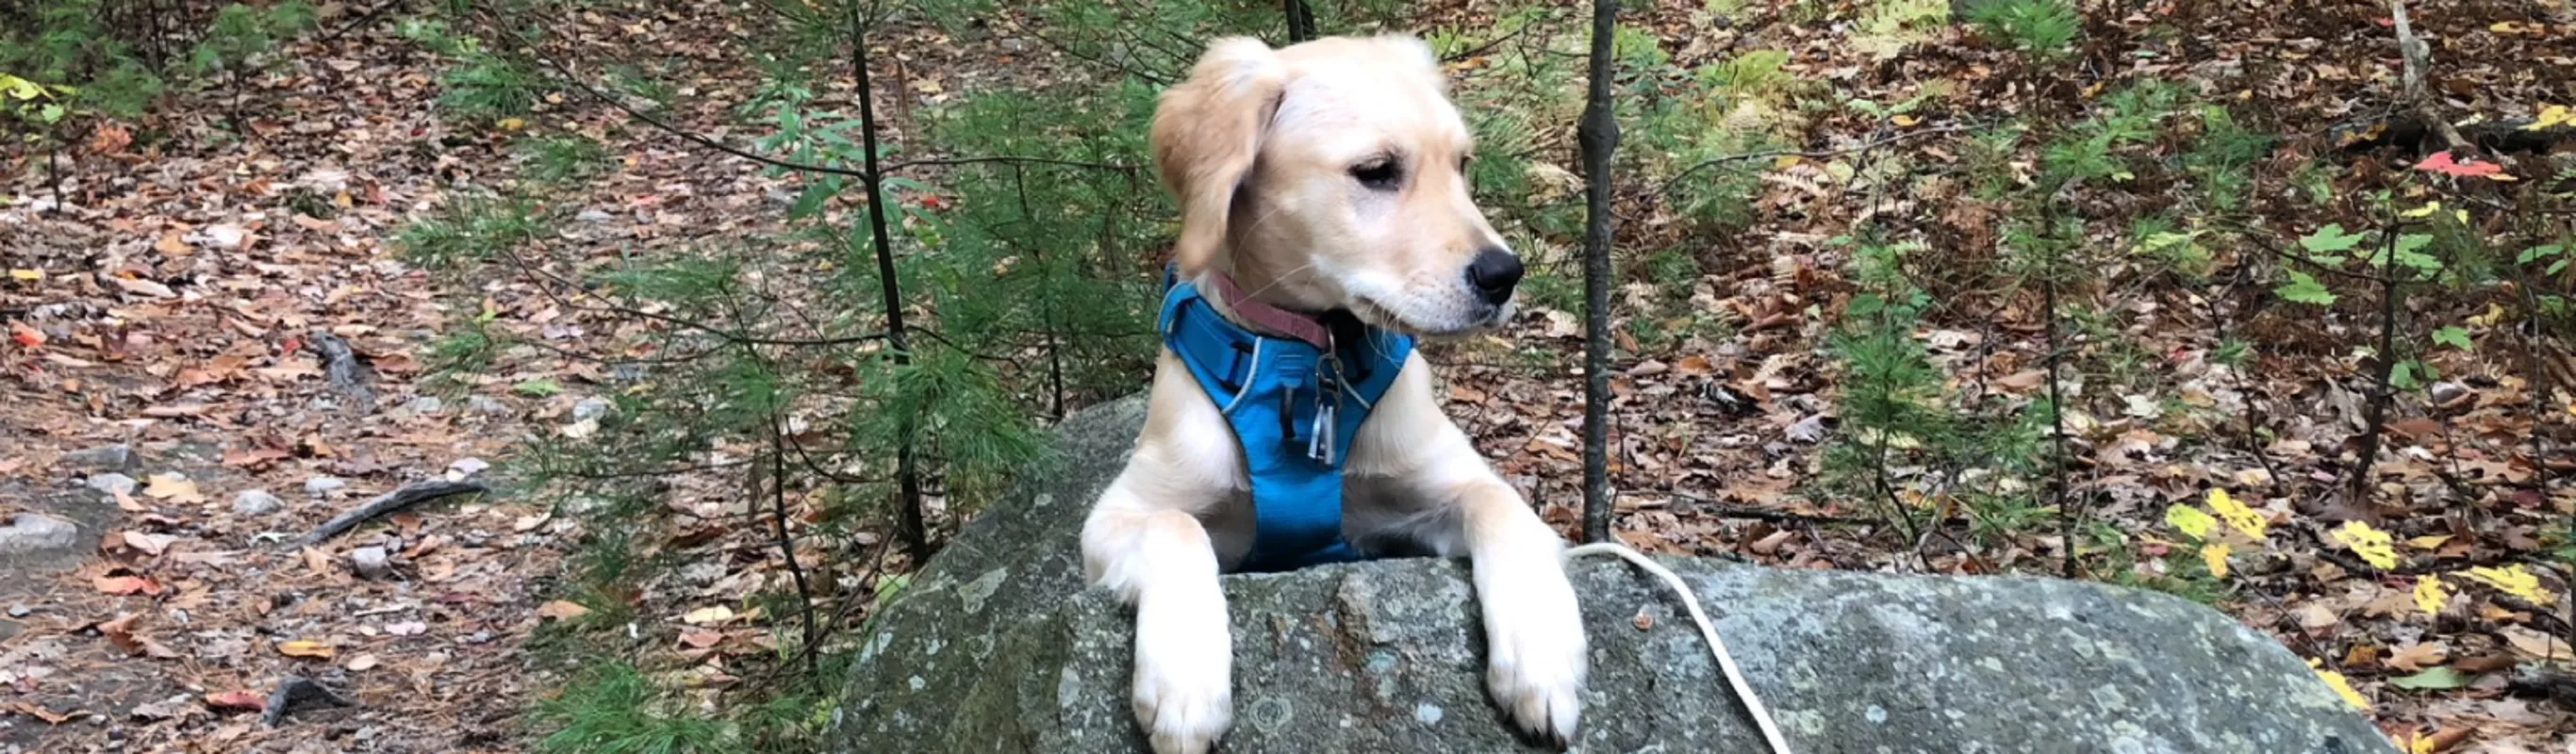 Dog on Rock outside with collar on